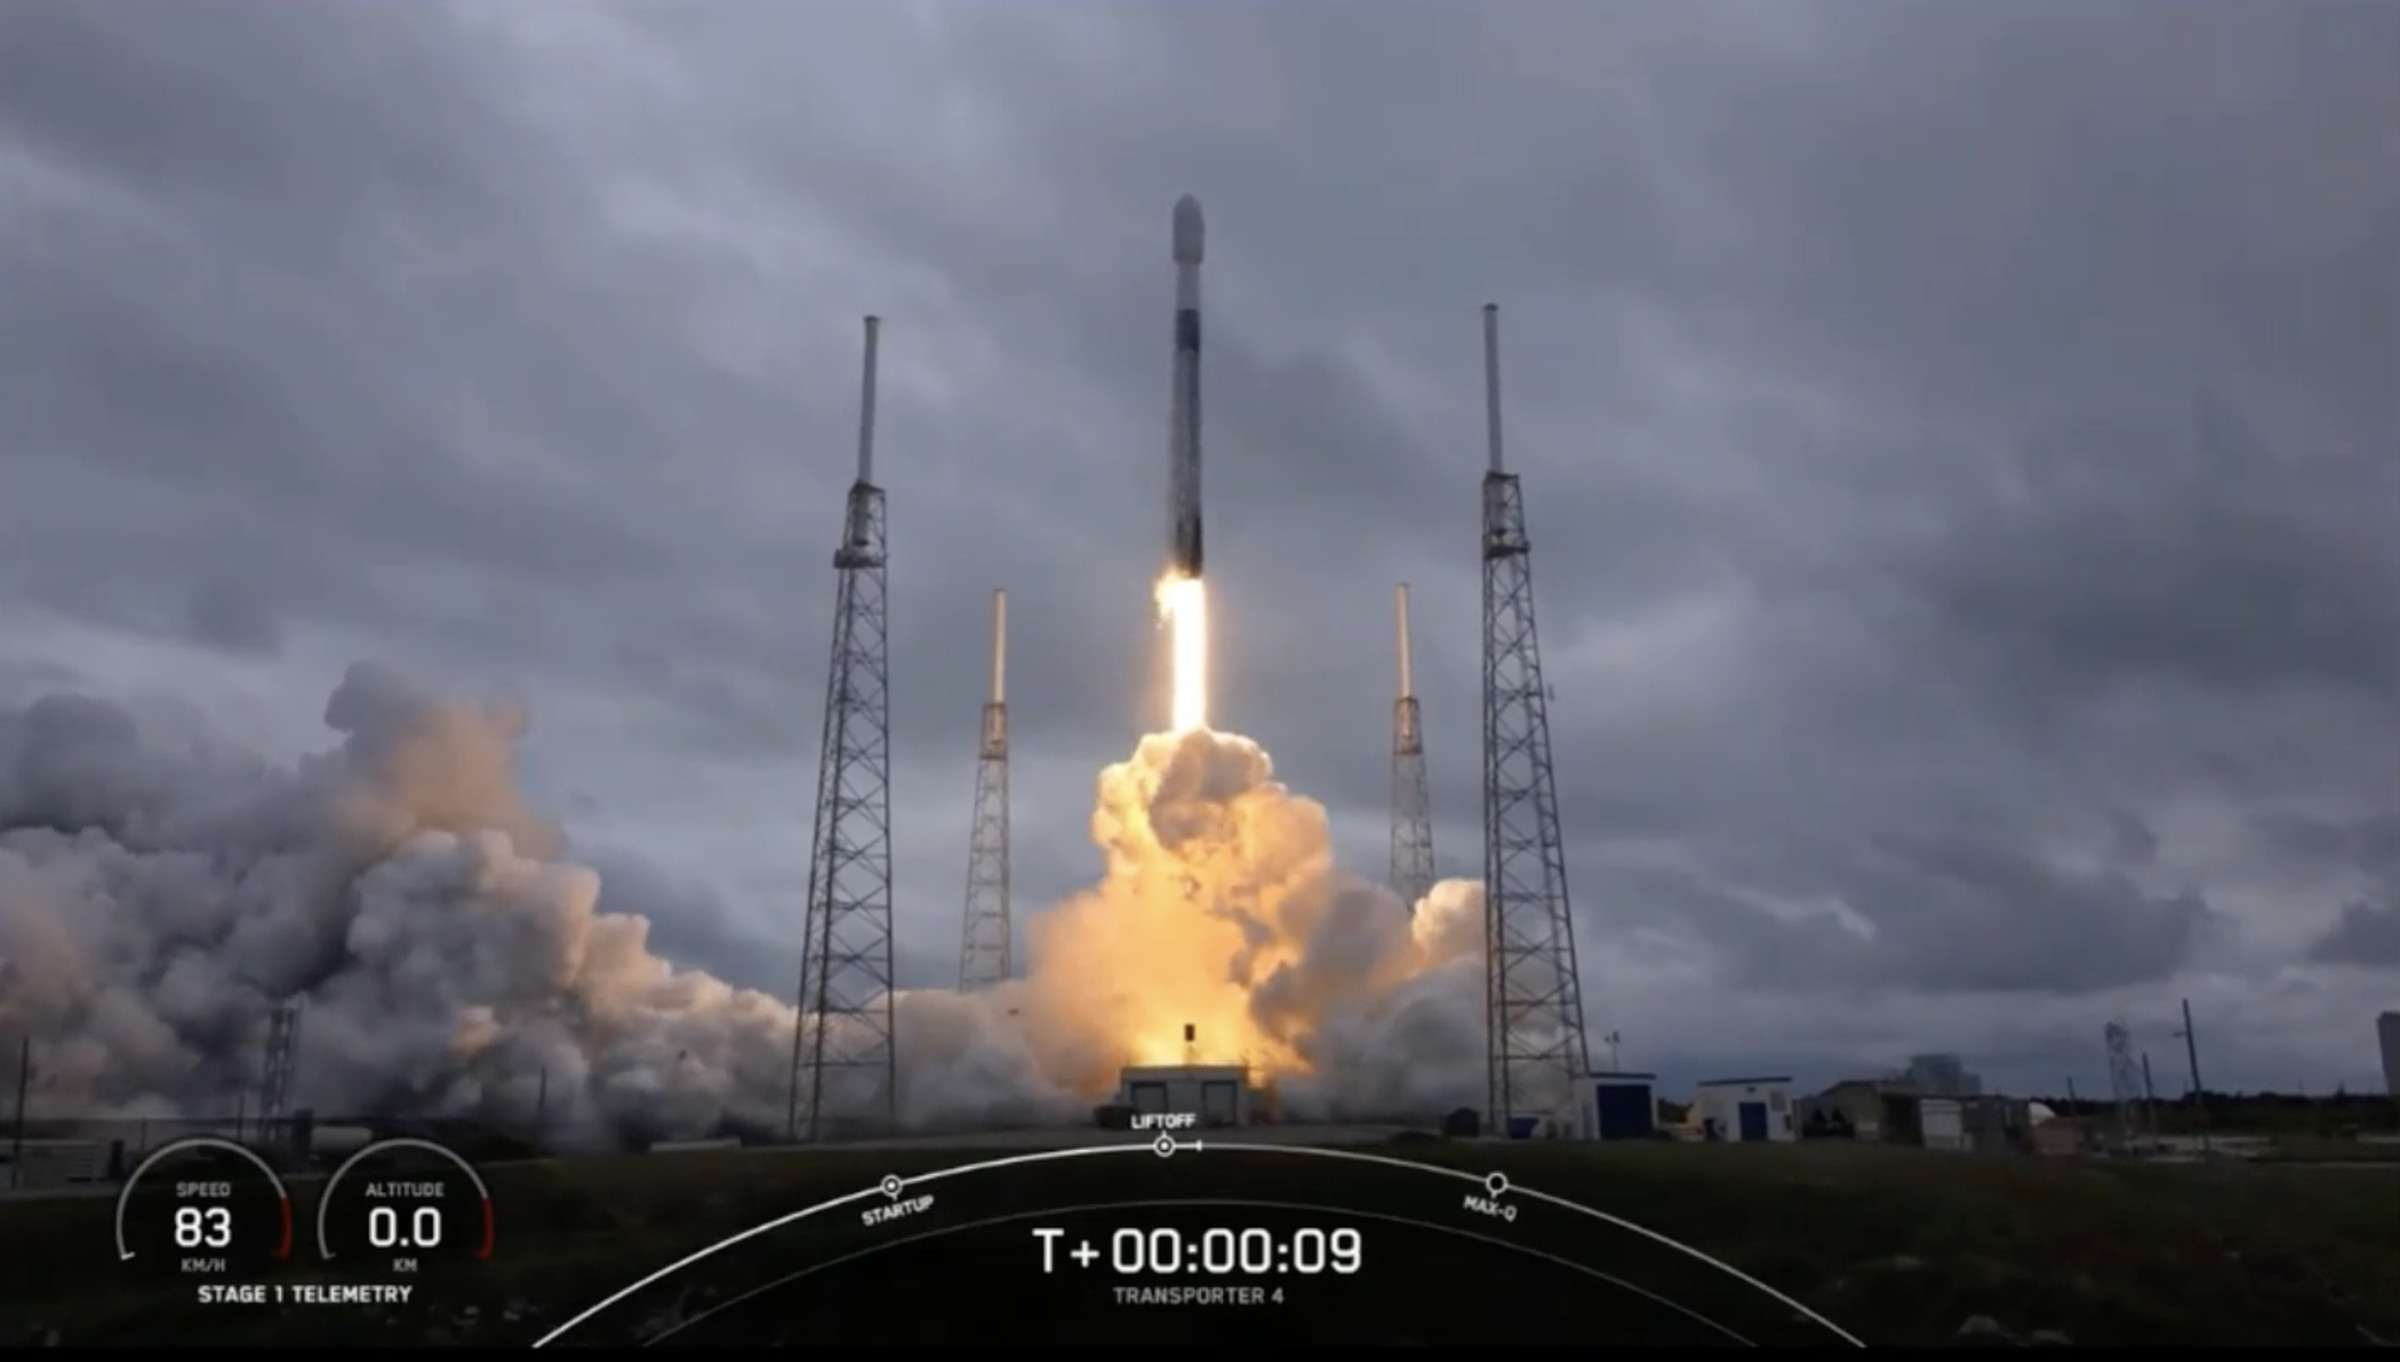 Earlier this year, Lynk deployed its first commercial satellite, which was ferried into orbit by a SpaceX Falcon 9.